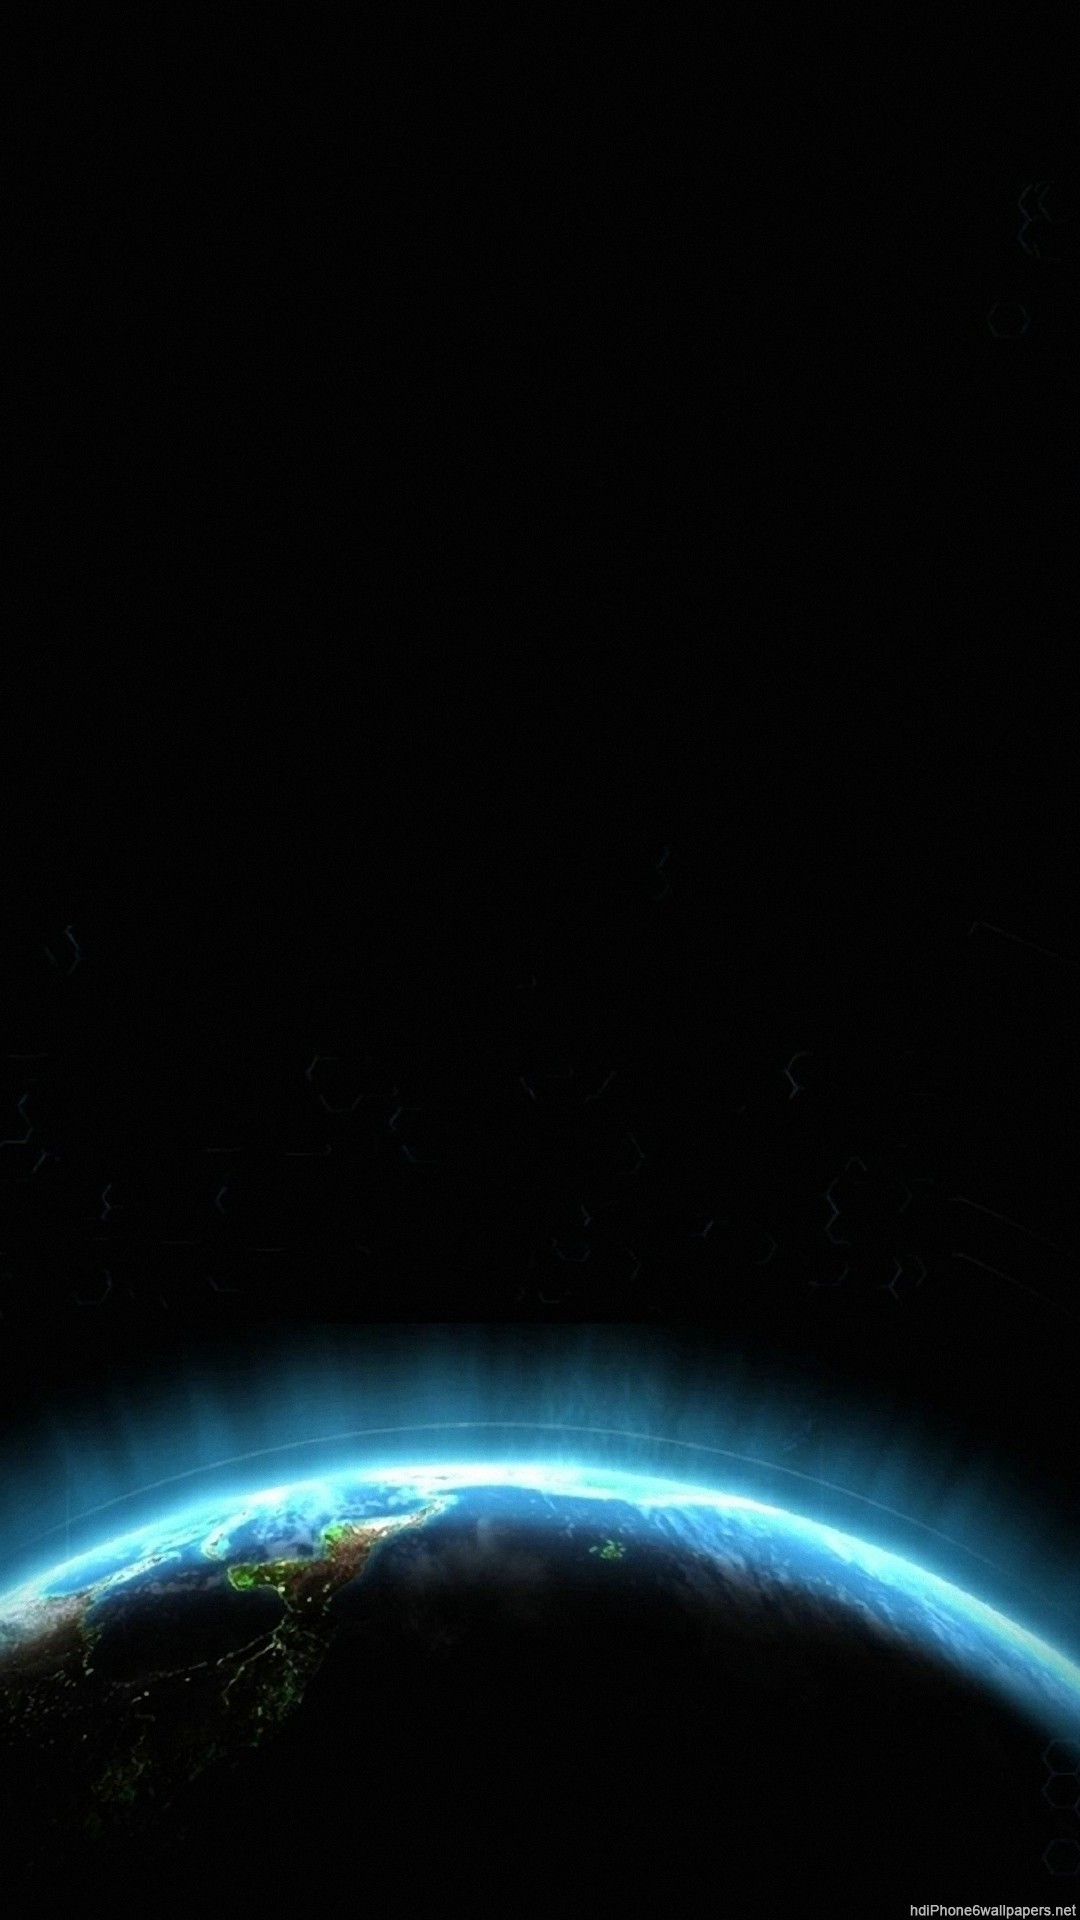 1080x1920, Circle Space Planet Blue Iphone 6 Wallpapers - Starcraft 2 Wallpaper Planet - HD Wallpaper 